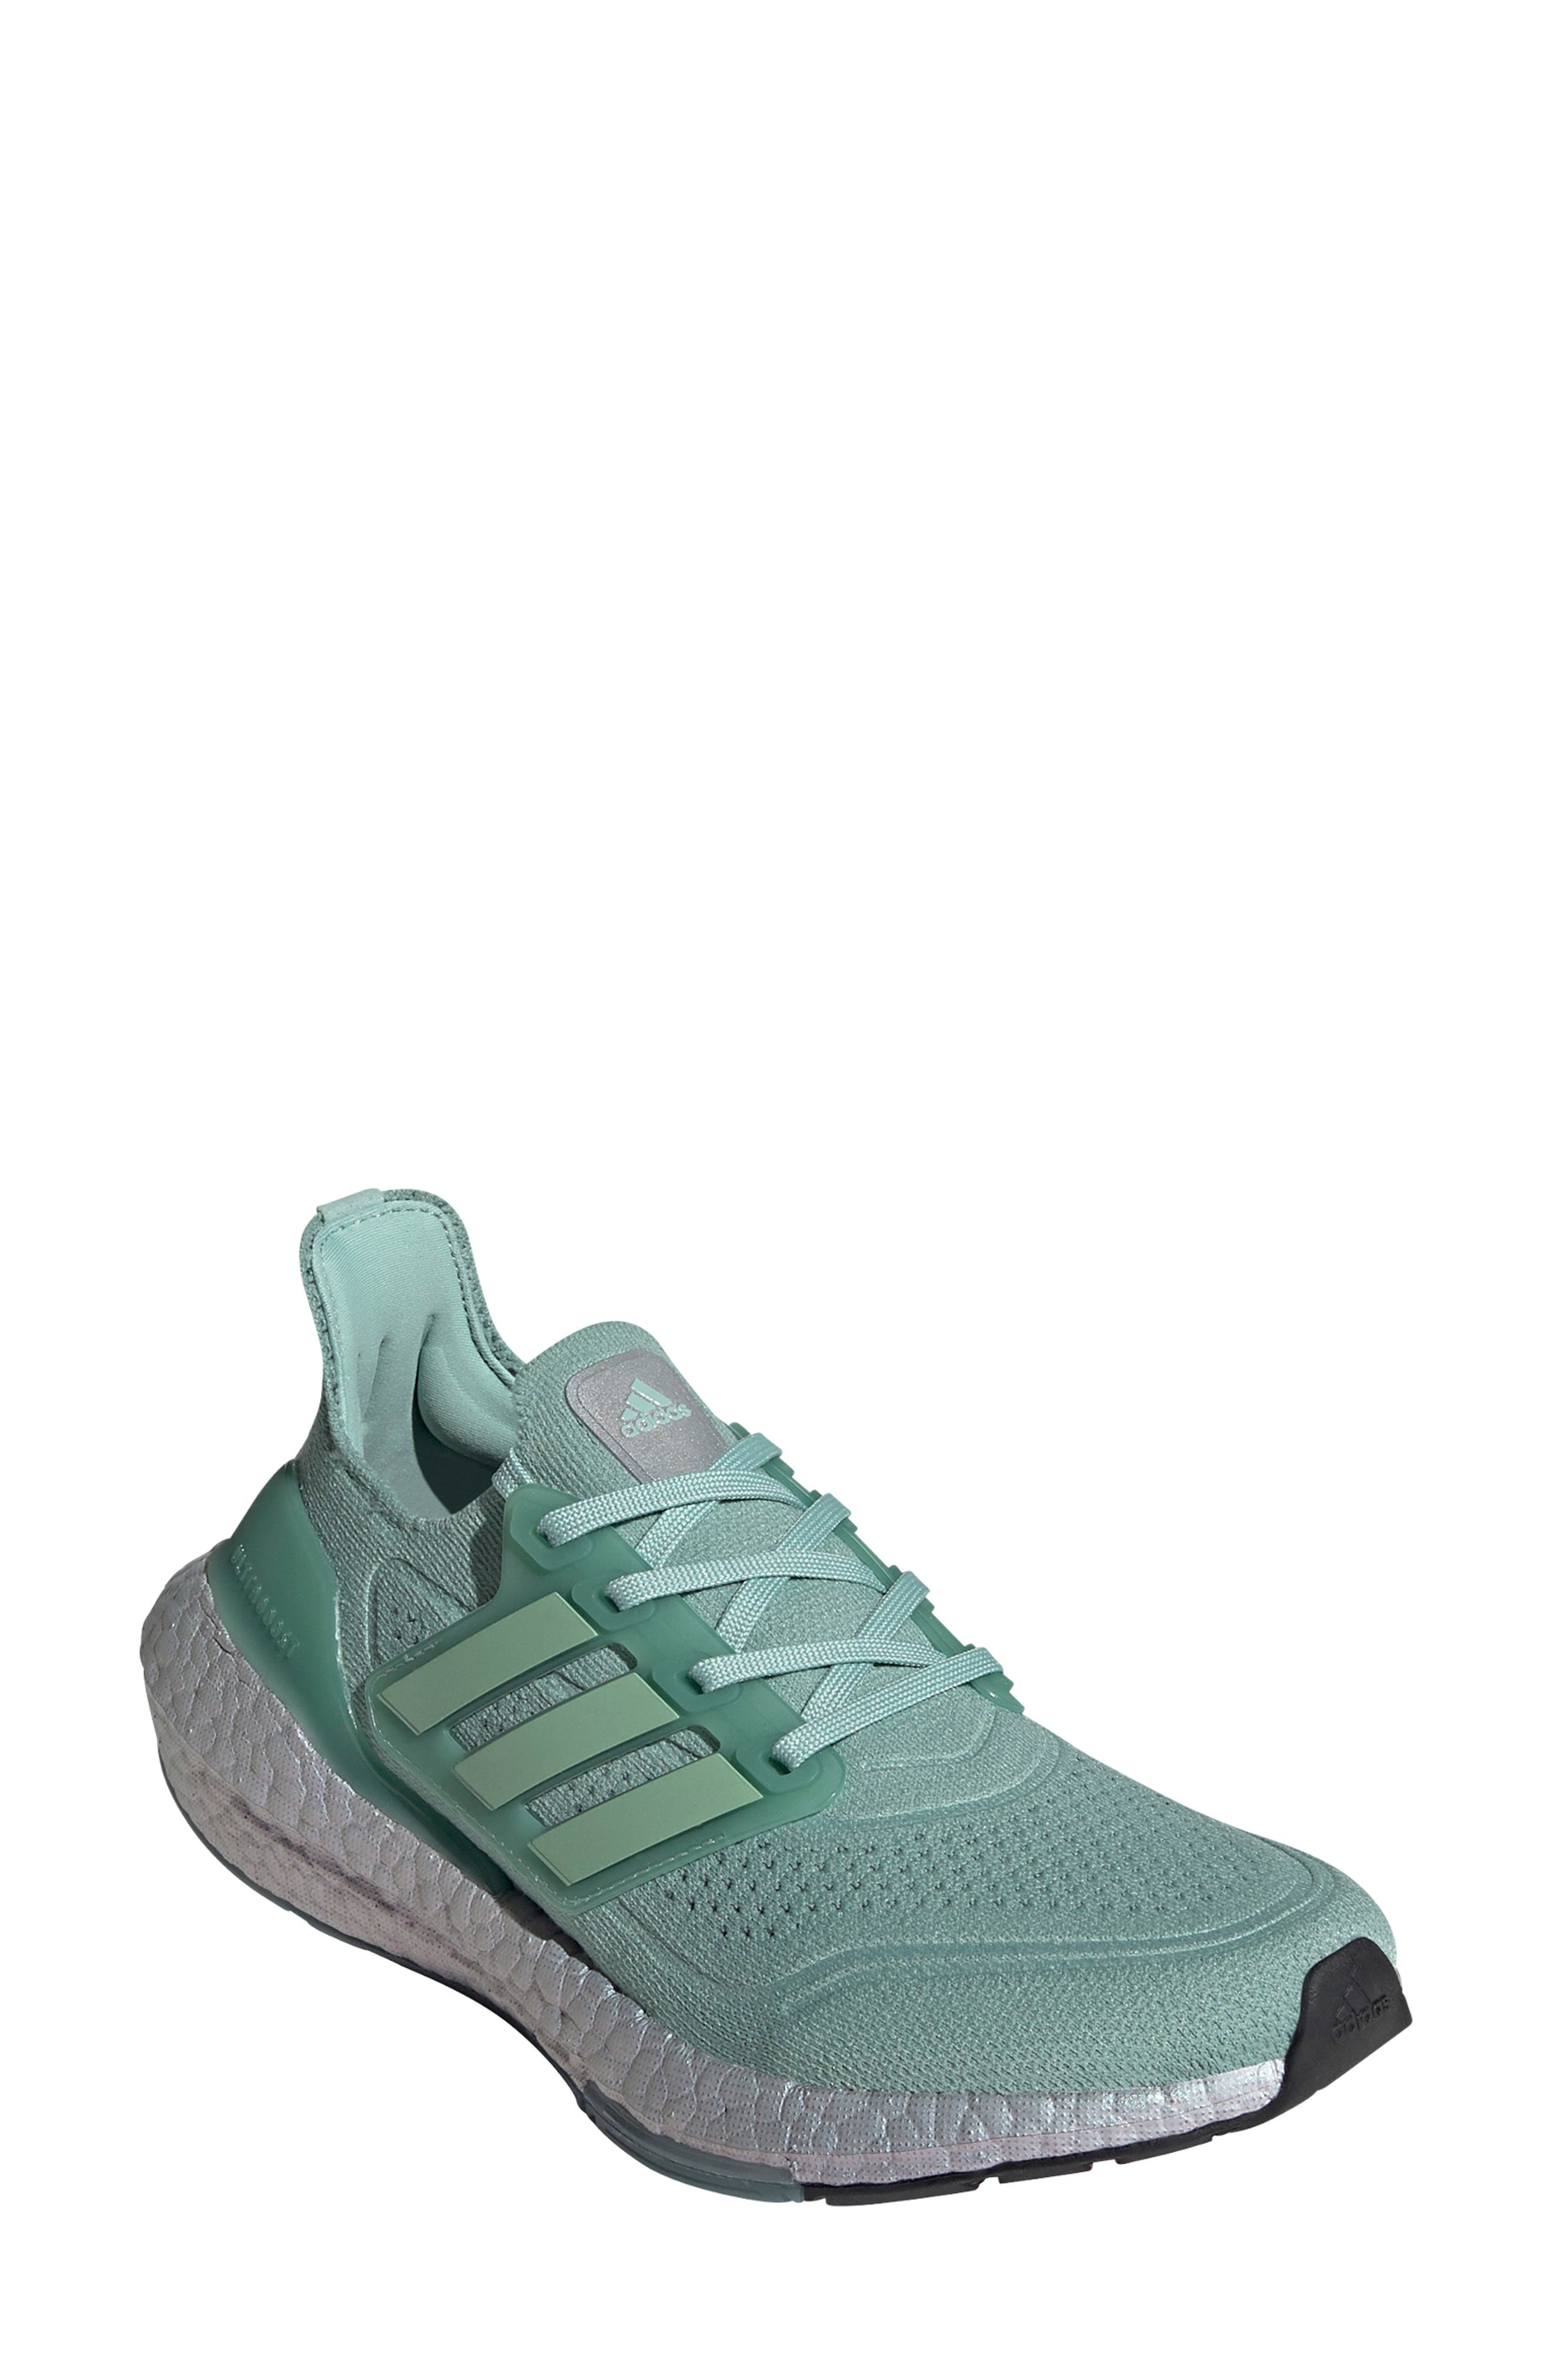 green athletic shoes womens